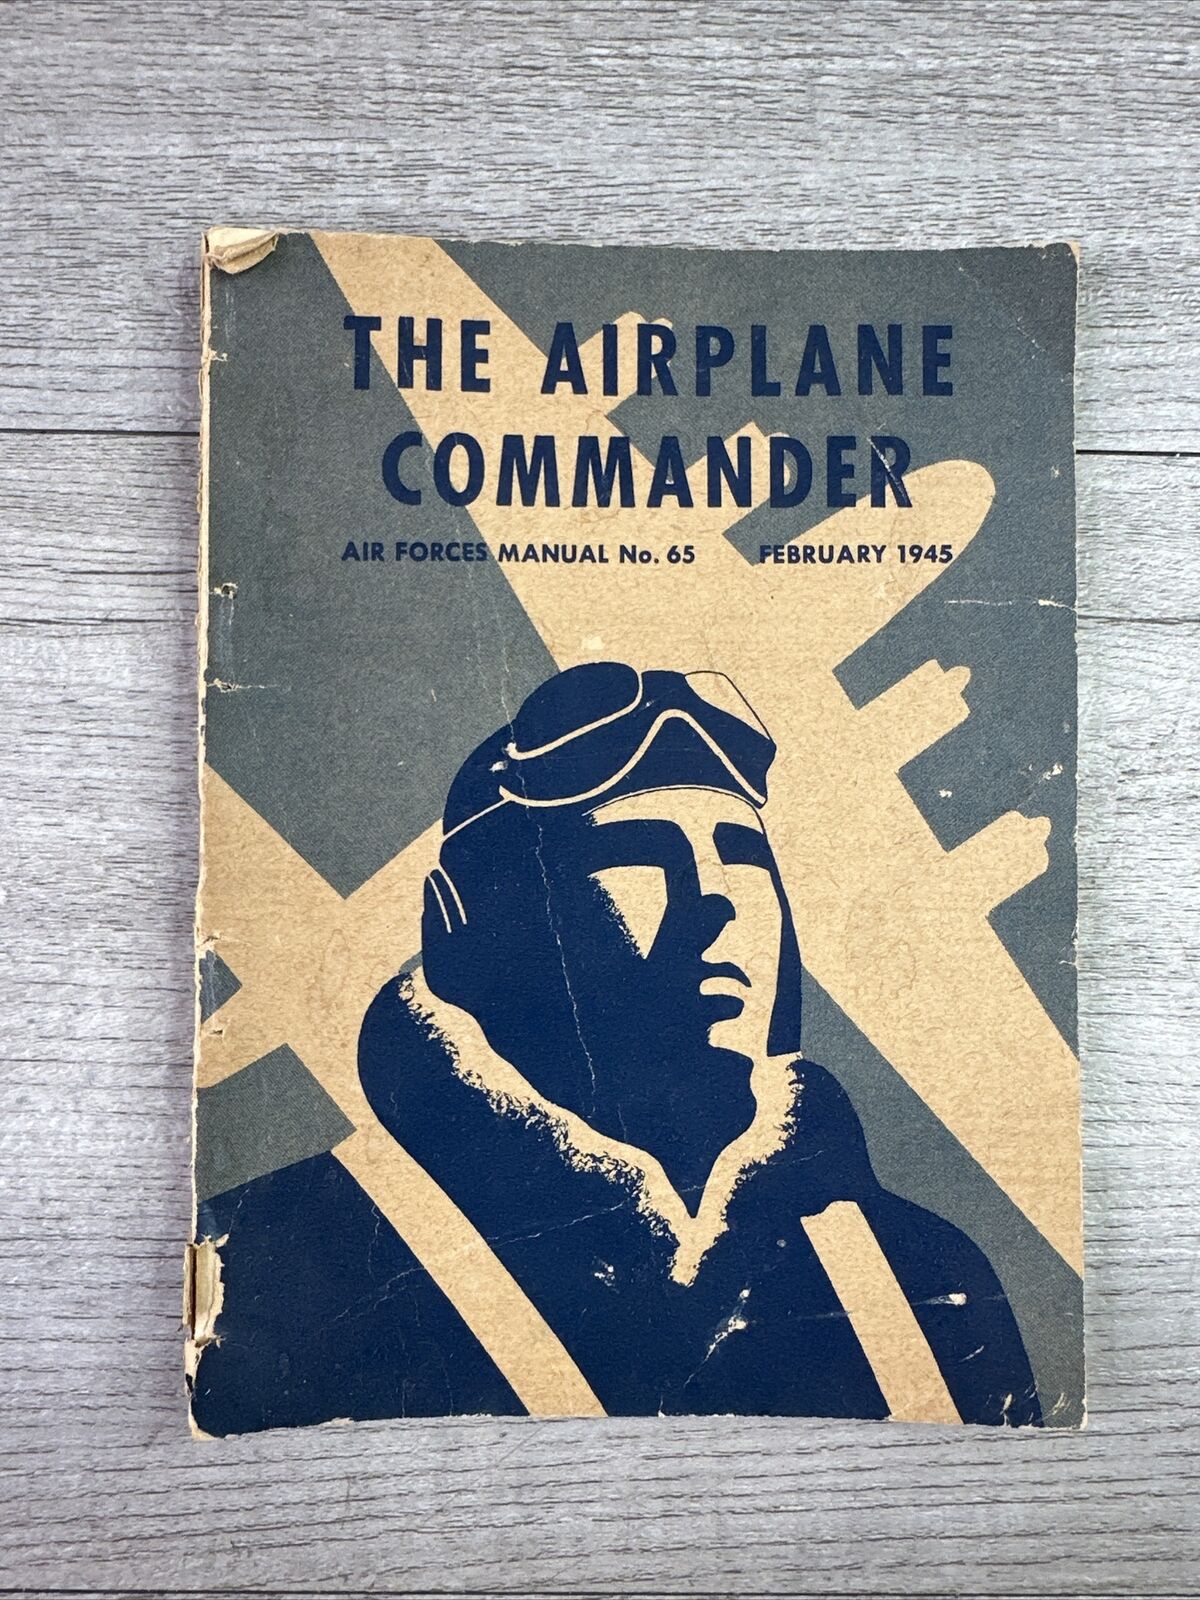 Vintage Feb 1945 Air Forces Manual No. 65 The Airplane Commander Booklet